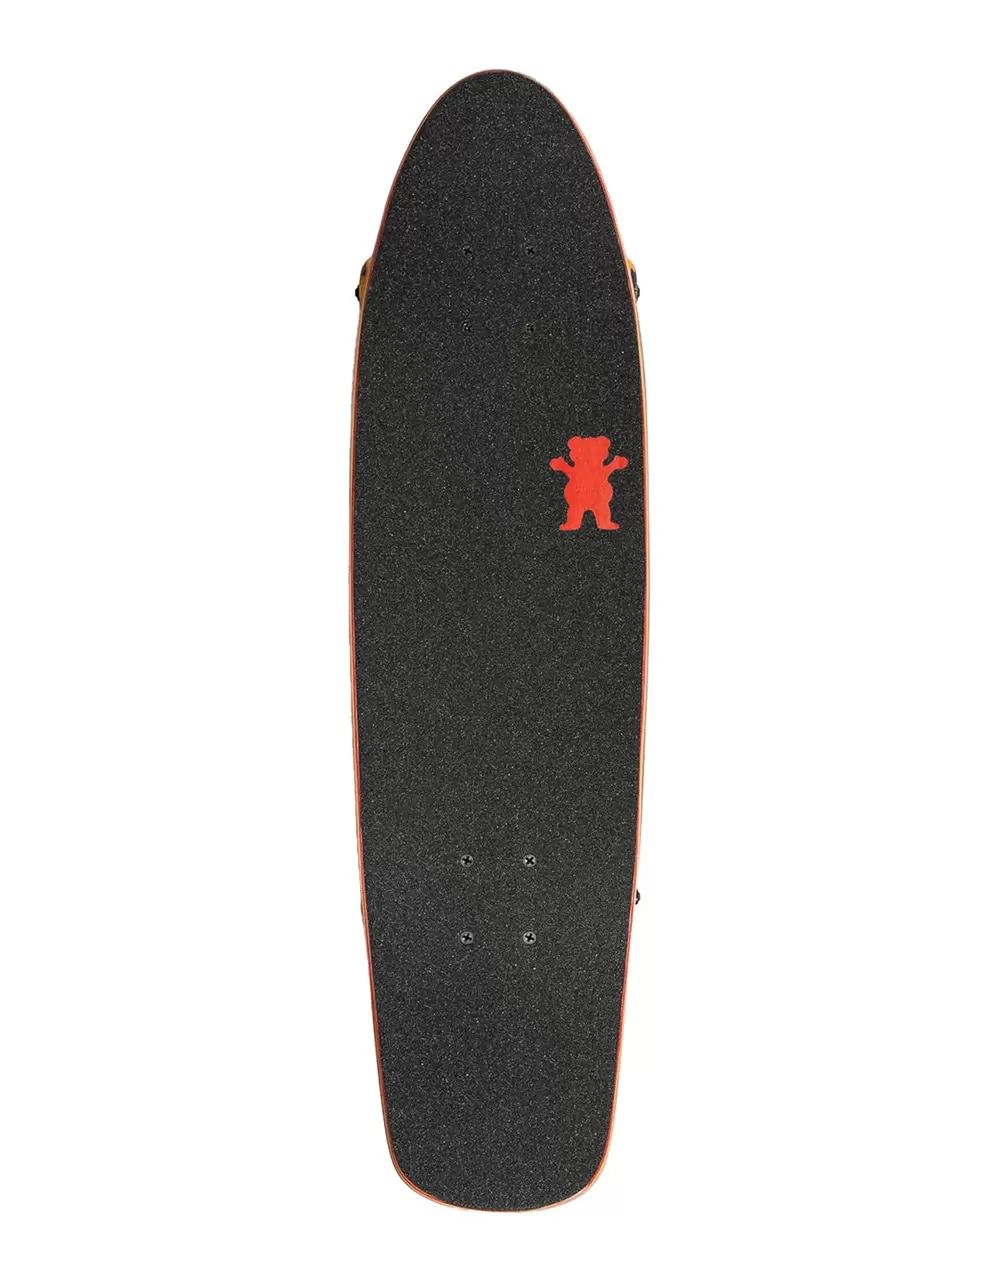 GRIZZLY 7.75" Complete Cruiser Skateboard | Tillys